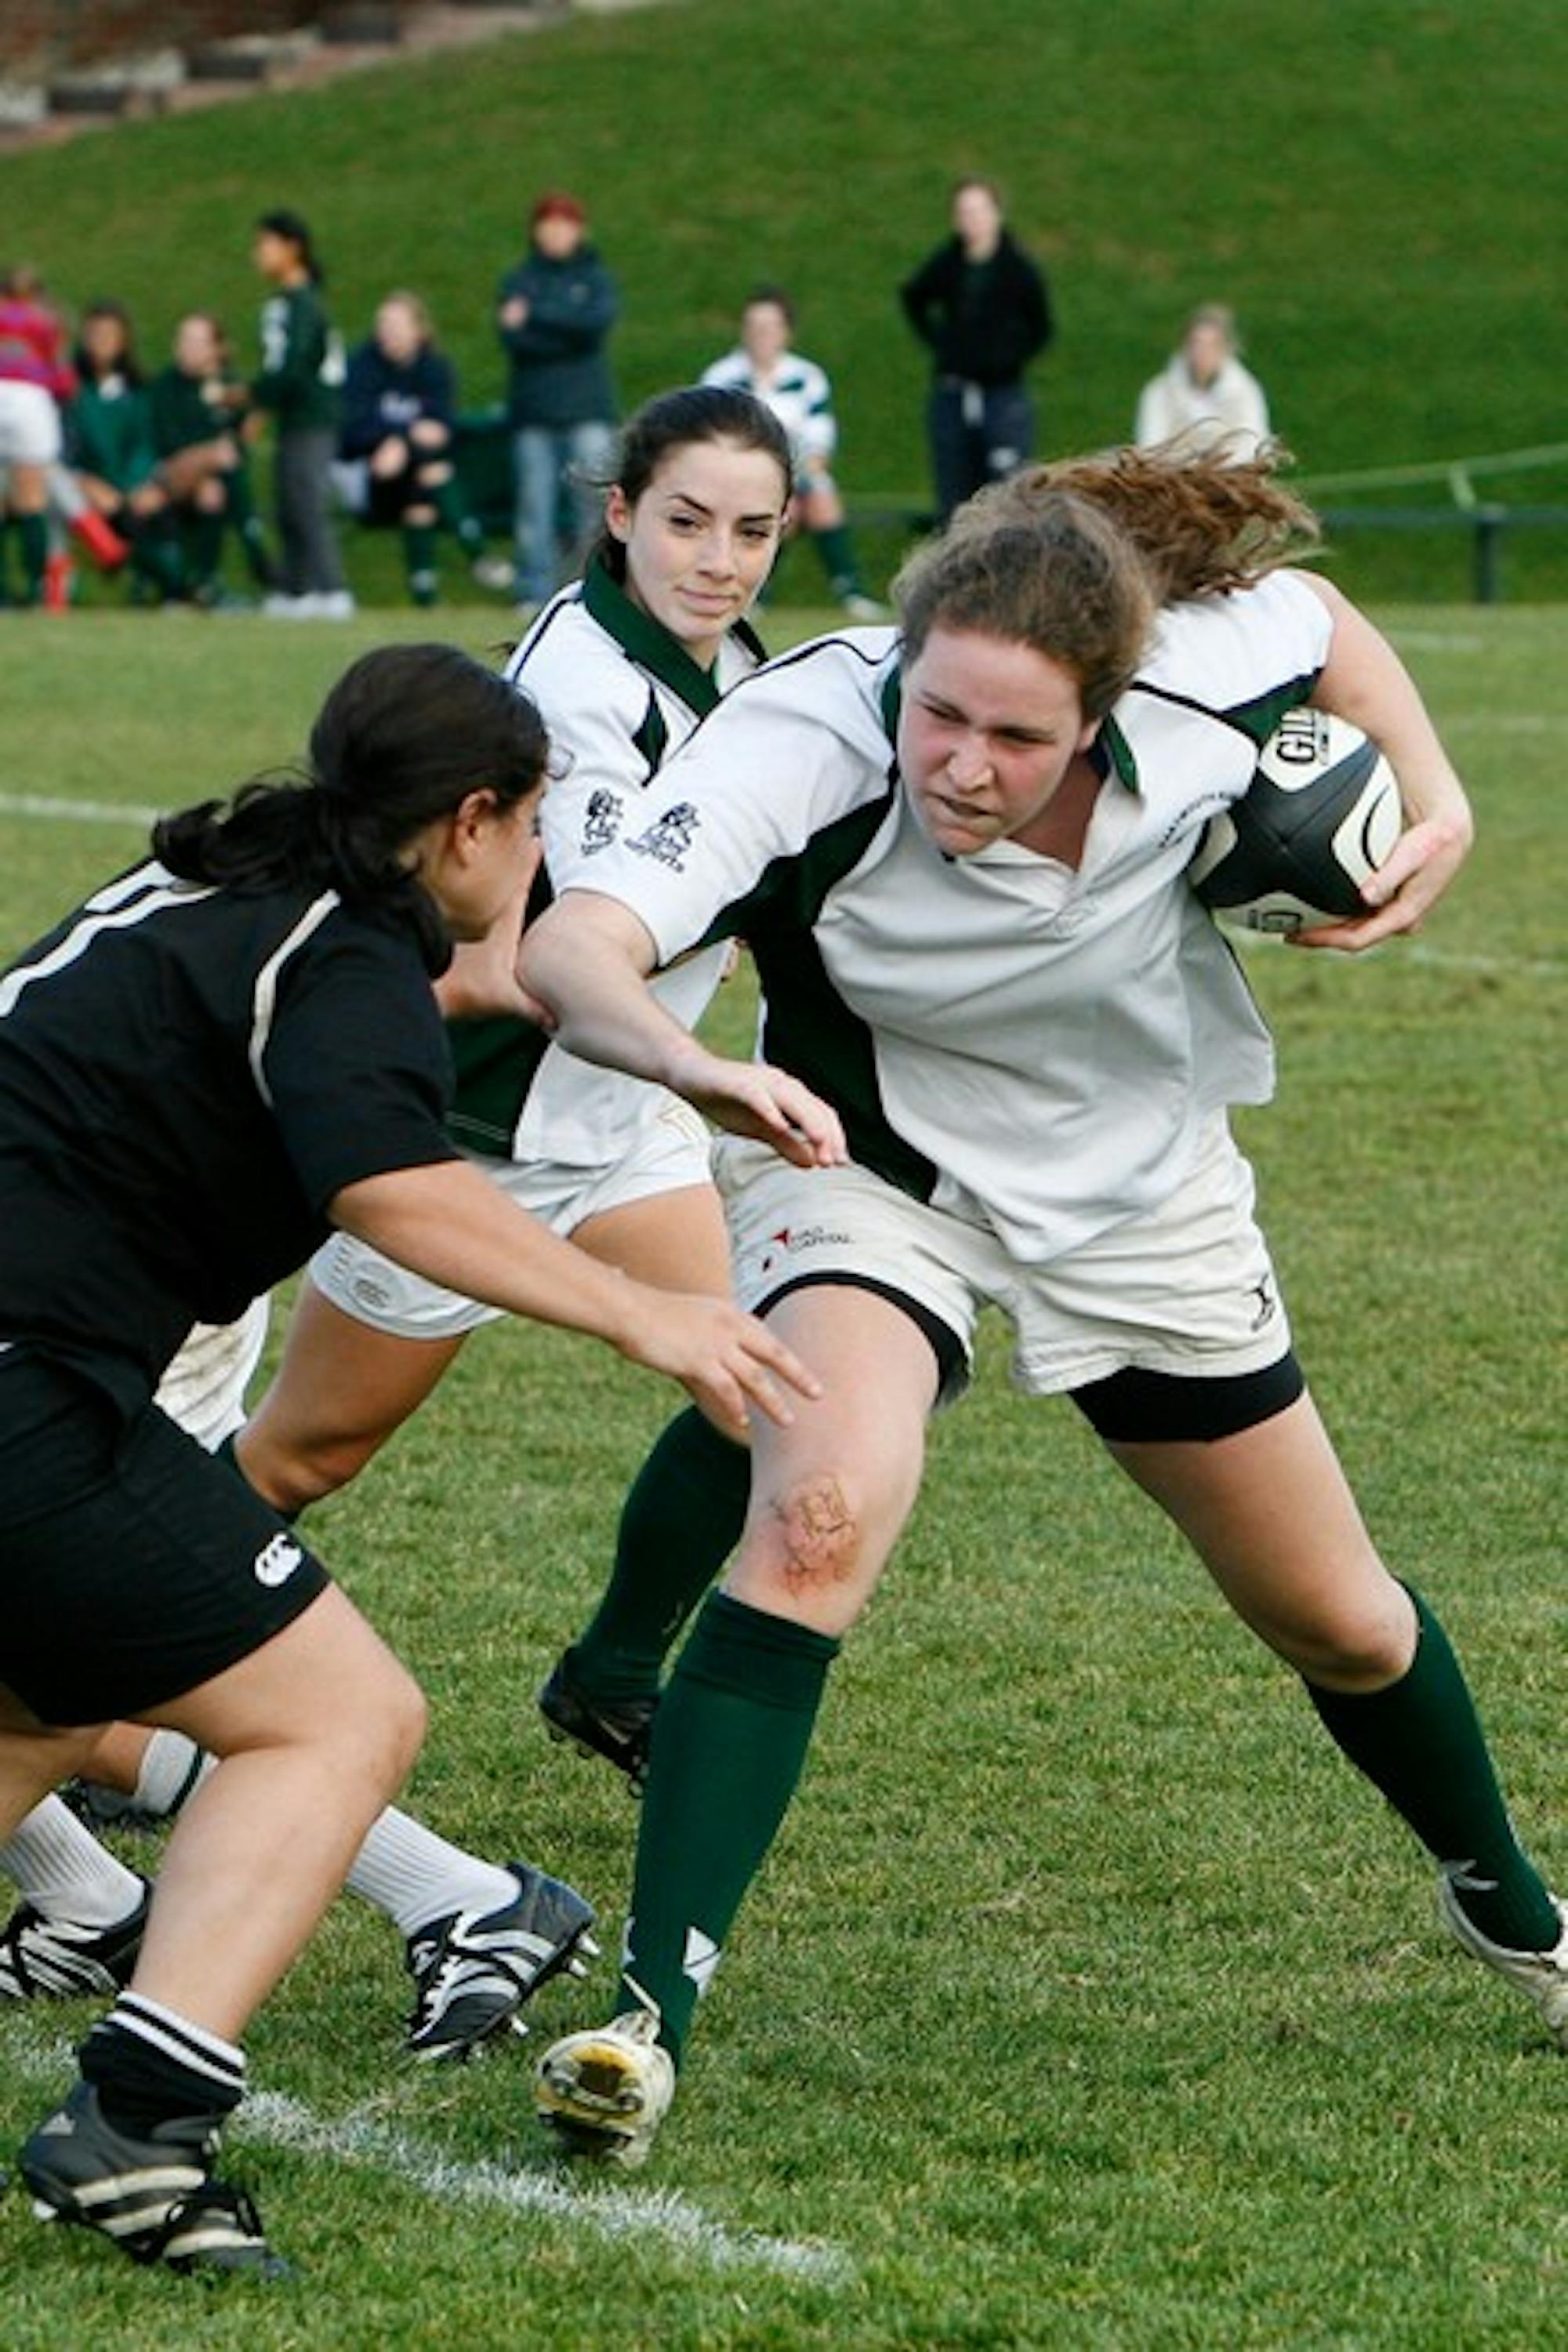 04.26.10.sports.WRUGBY2